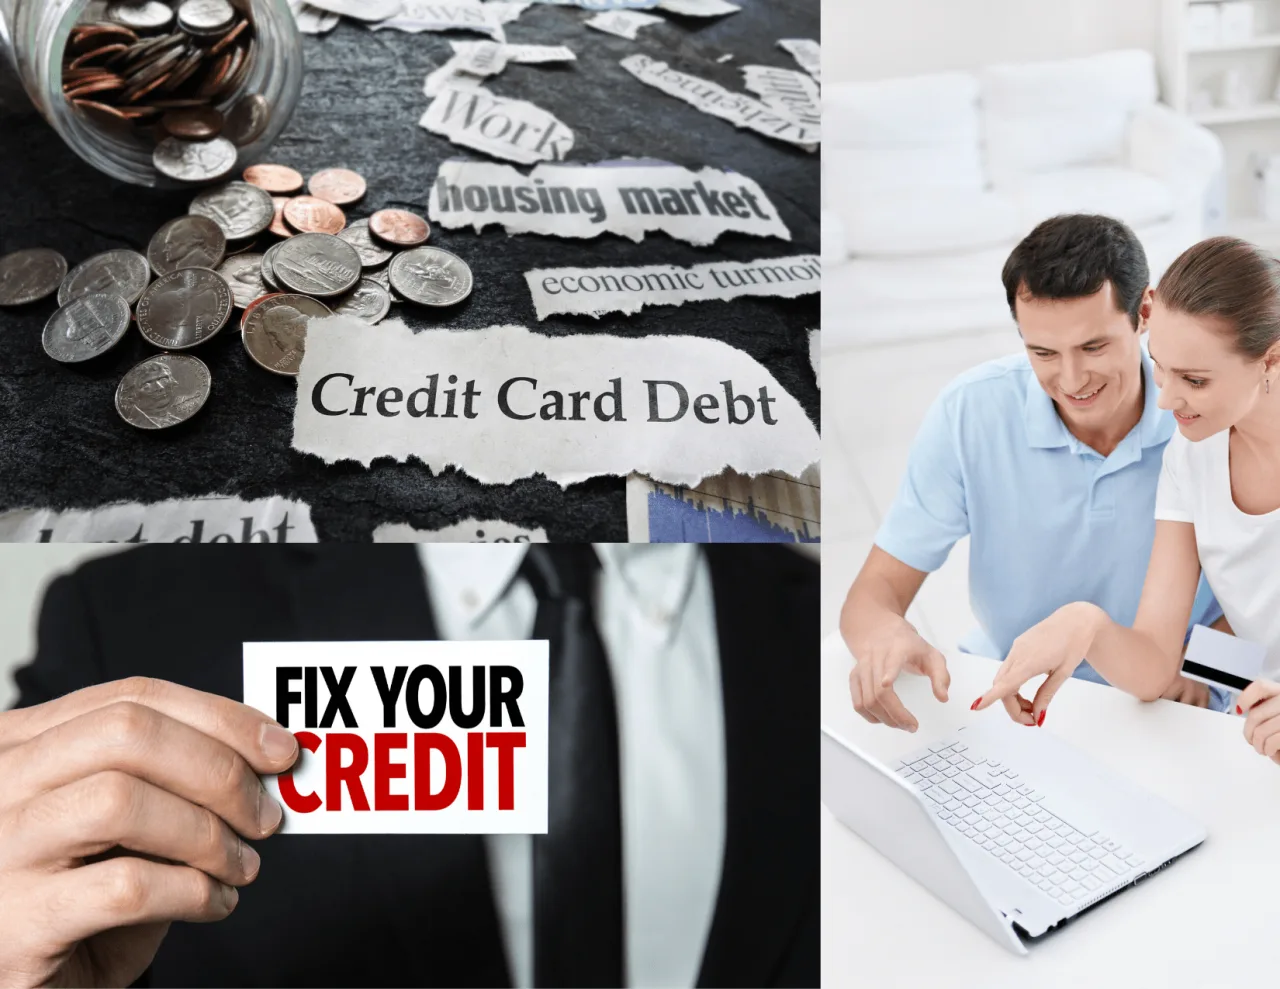 Fix Your Credit and Change Your Life!